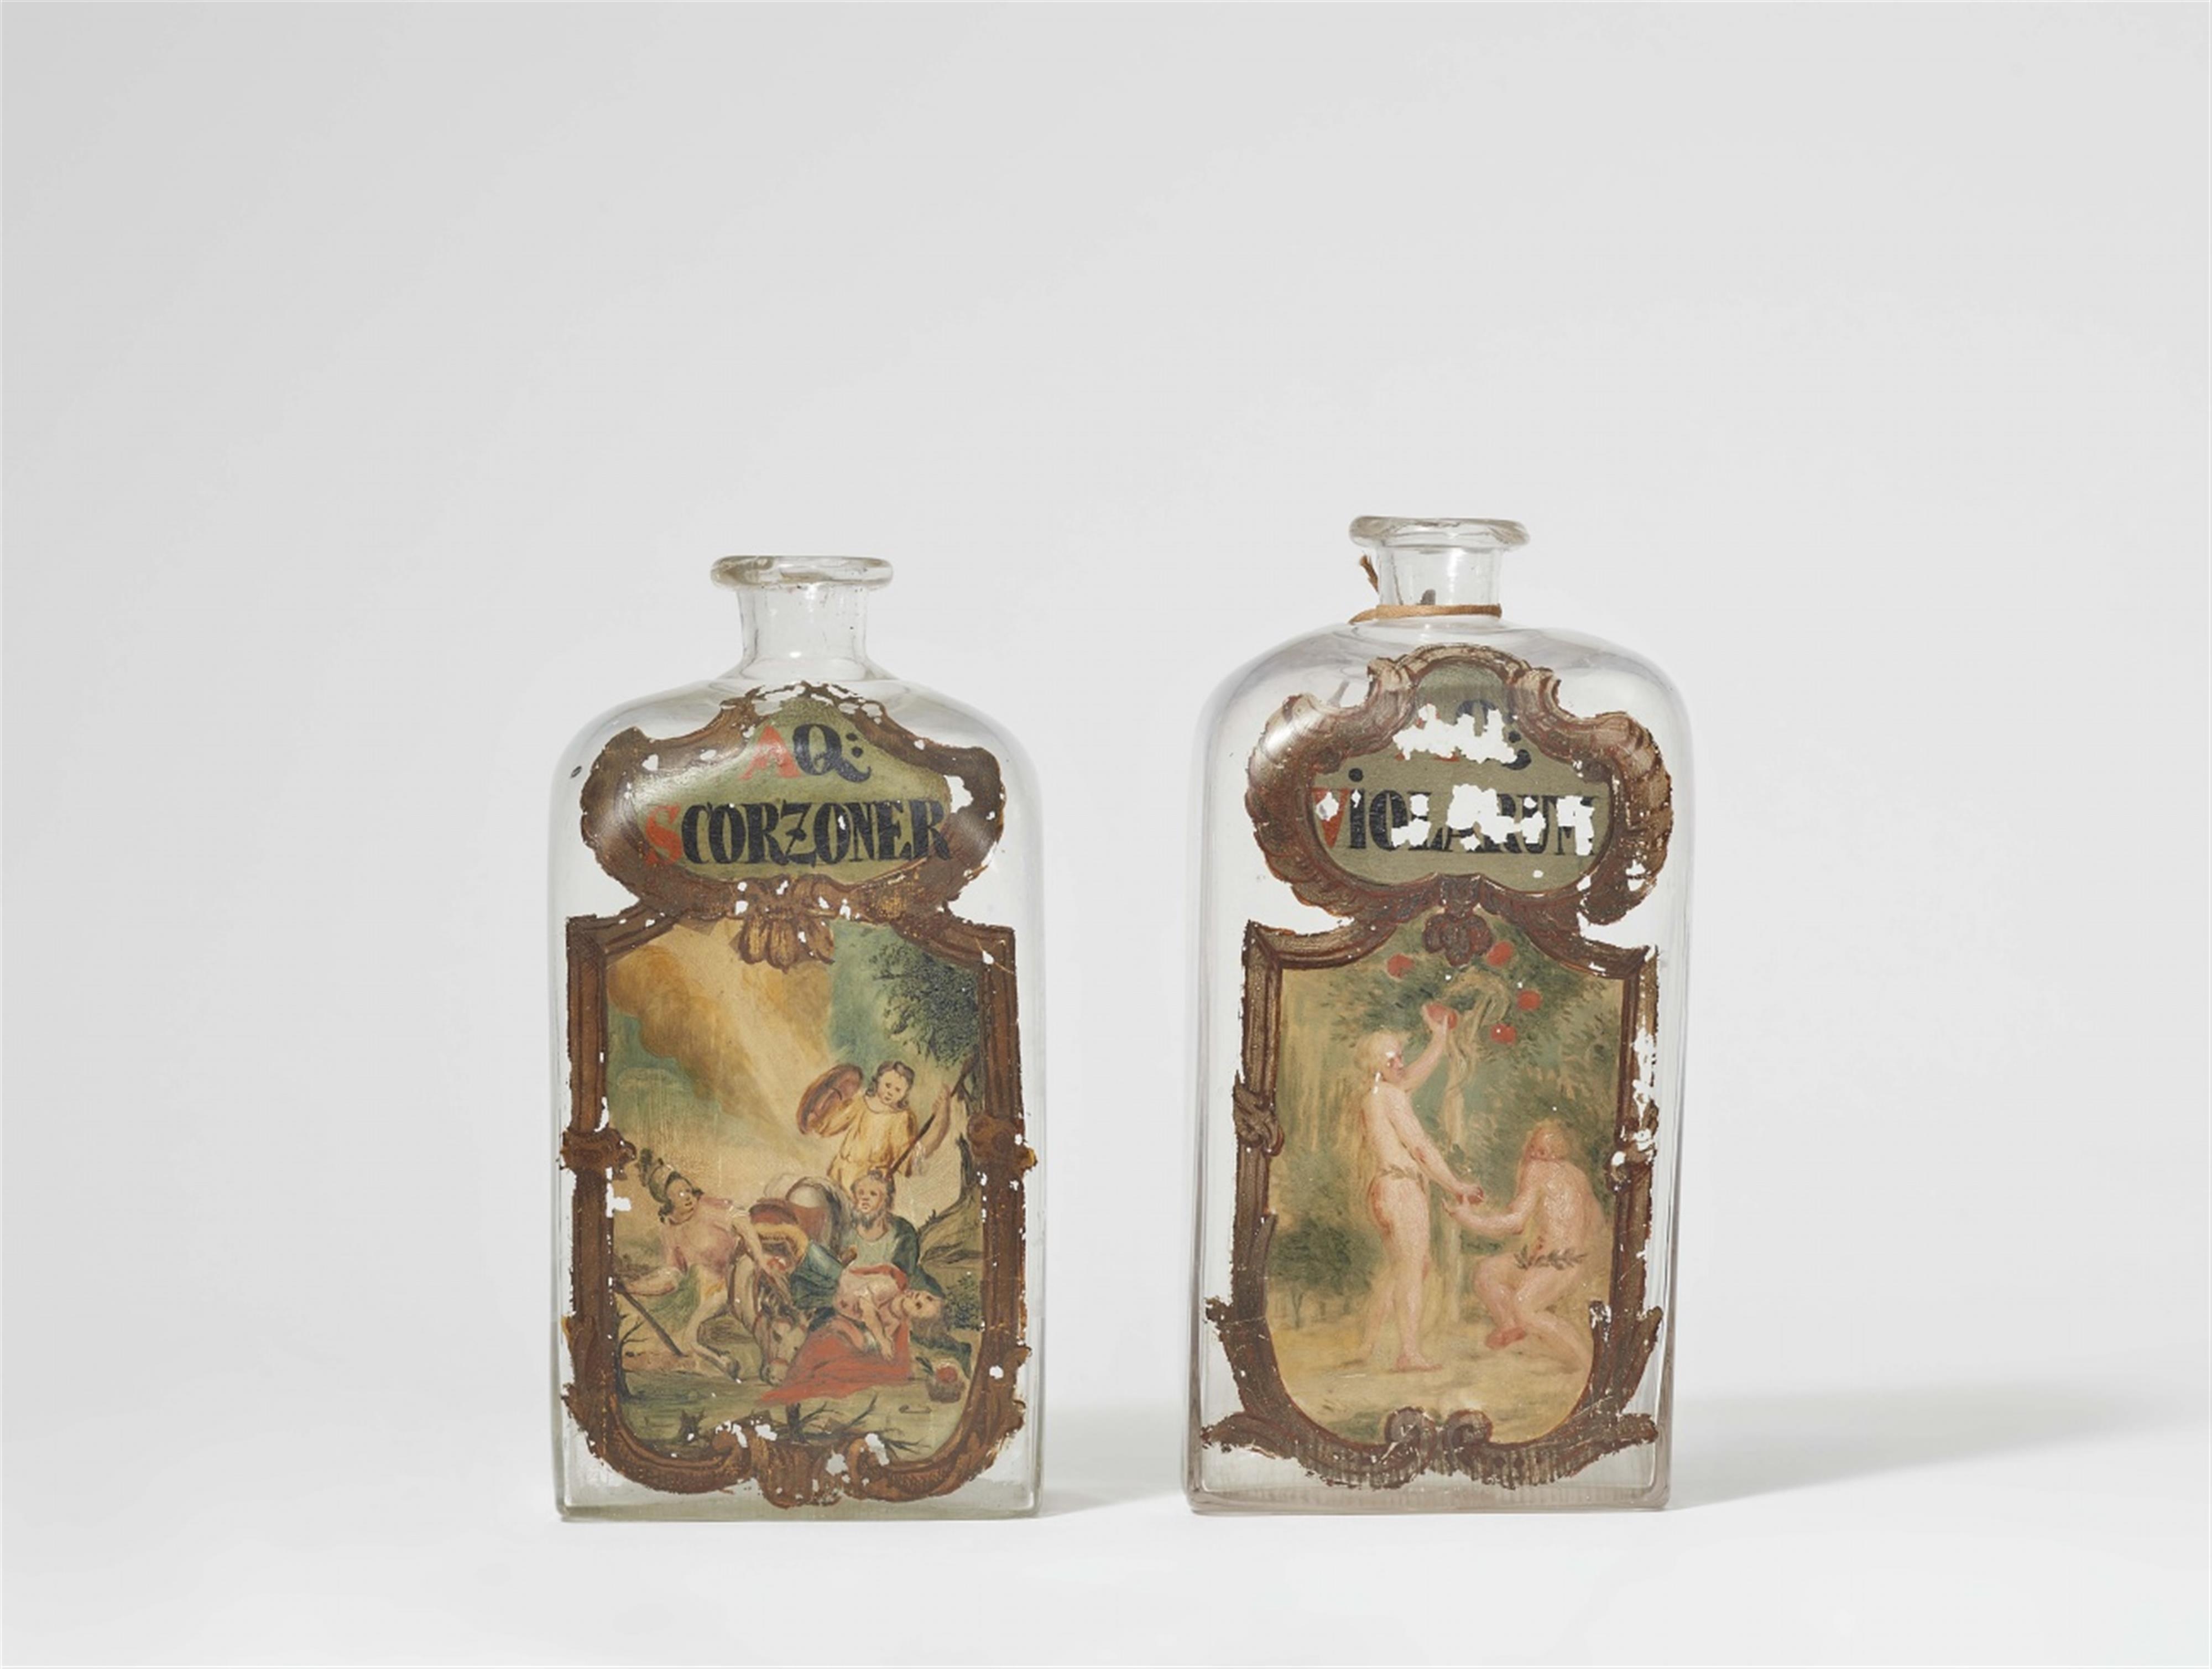 A pair of 18th century glass bottles from a monastic apothecary - image-1